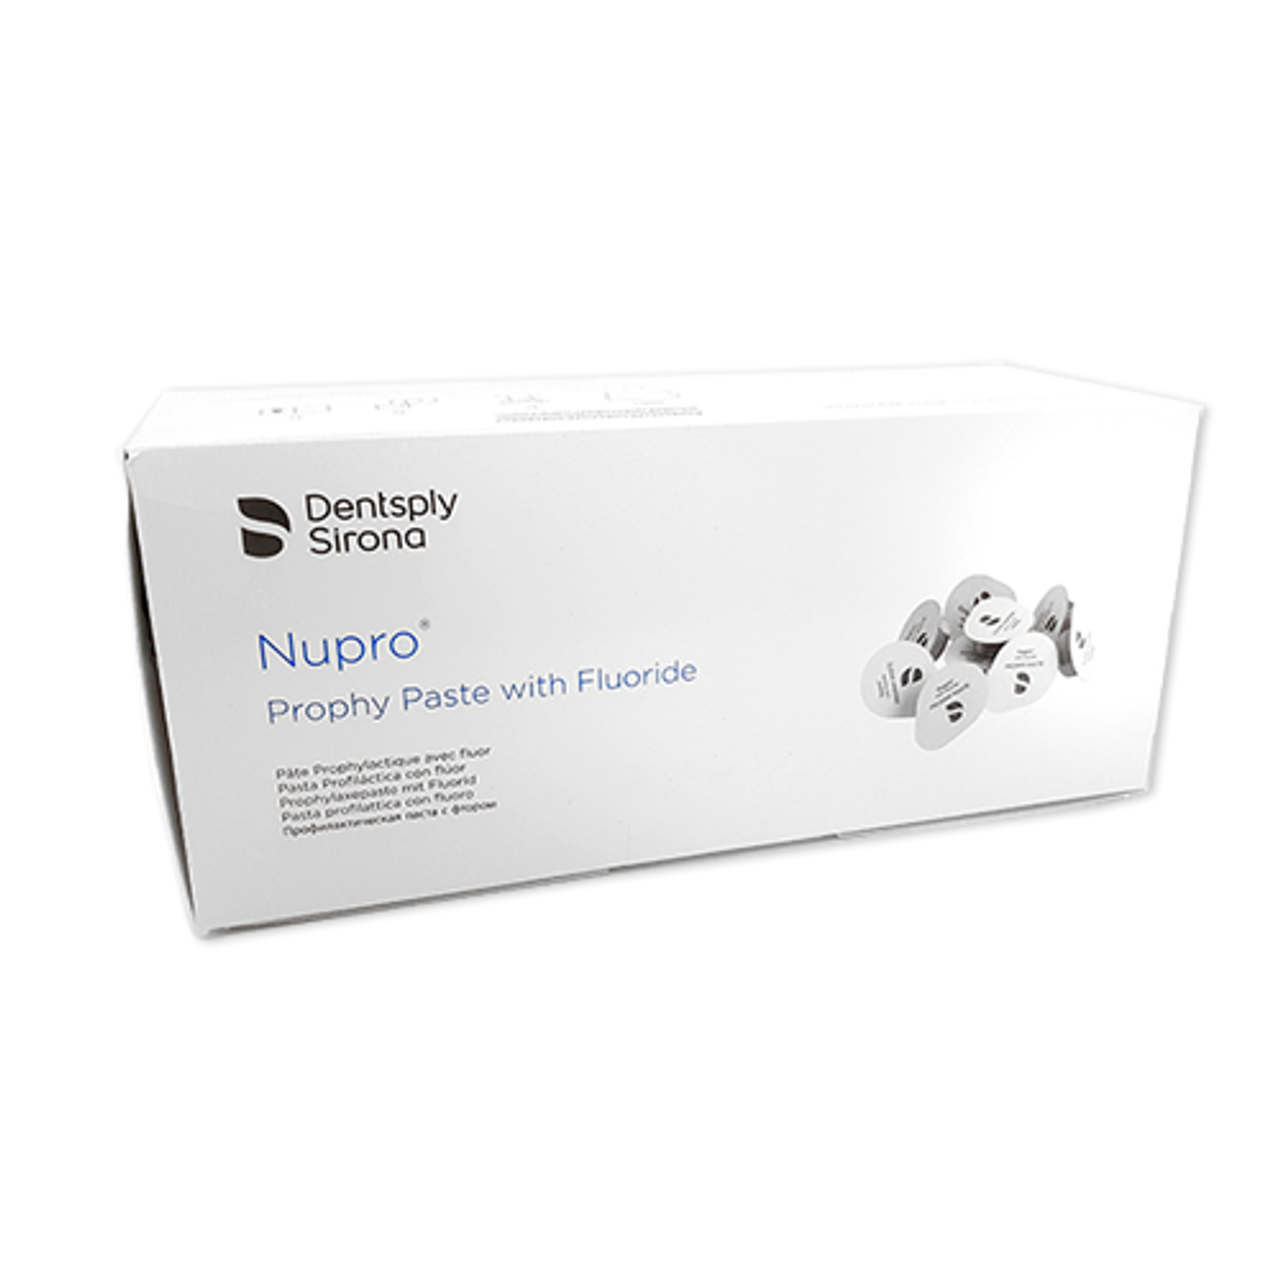 Dentsply Nupro Medium Mint Prophy Paste Infused with Fluoride - 200 Unit Dose Cups